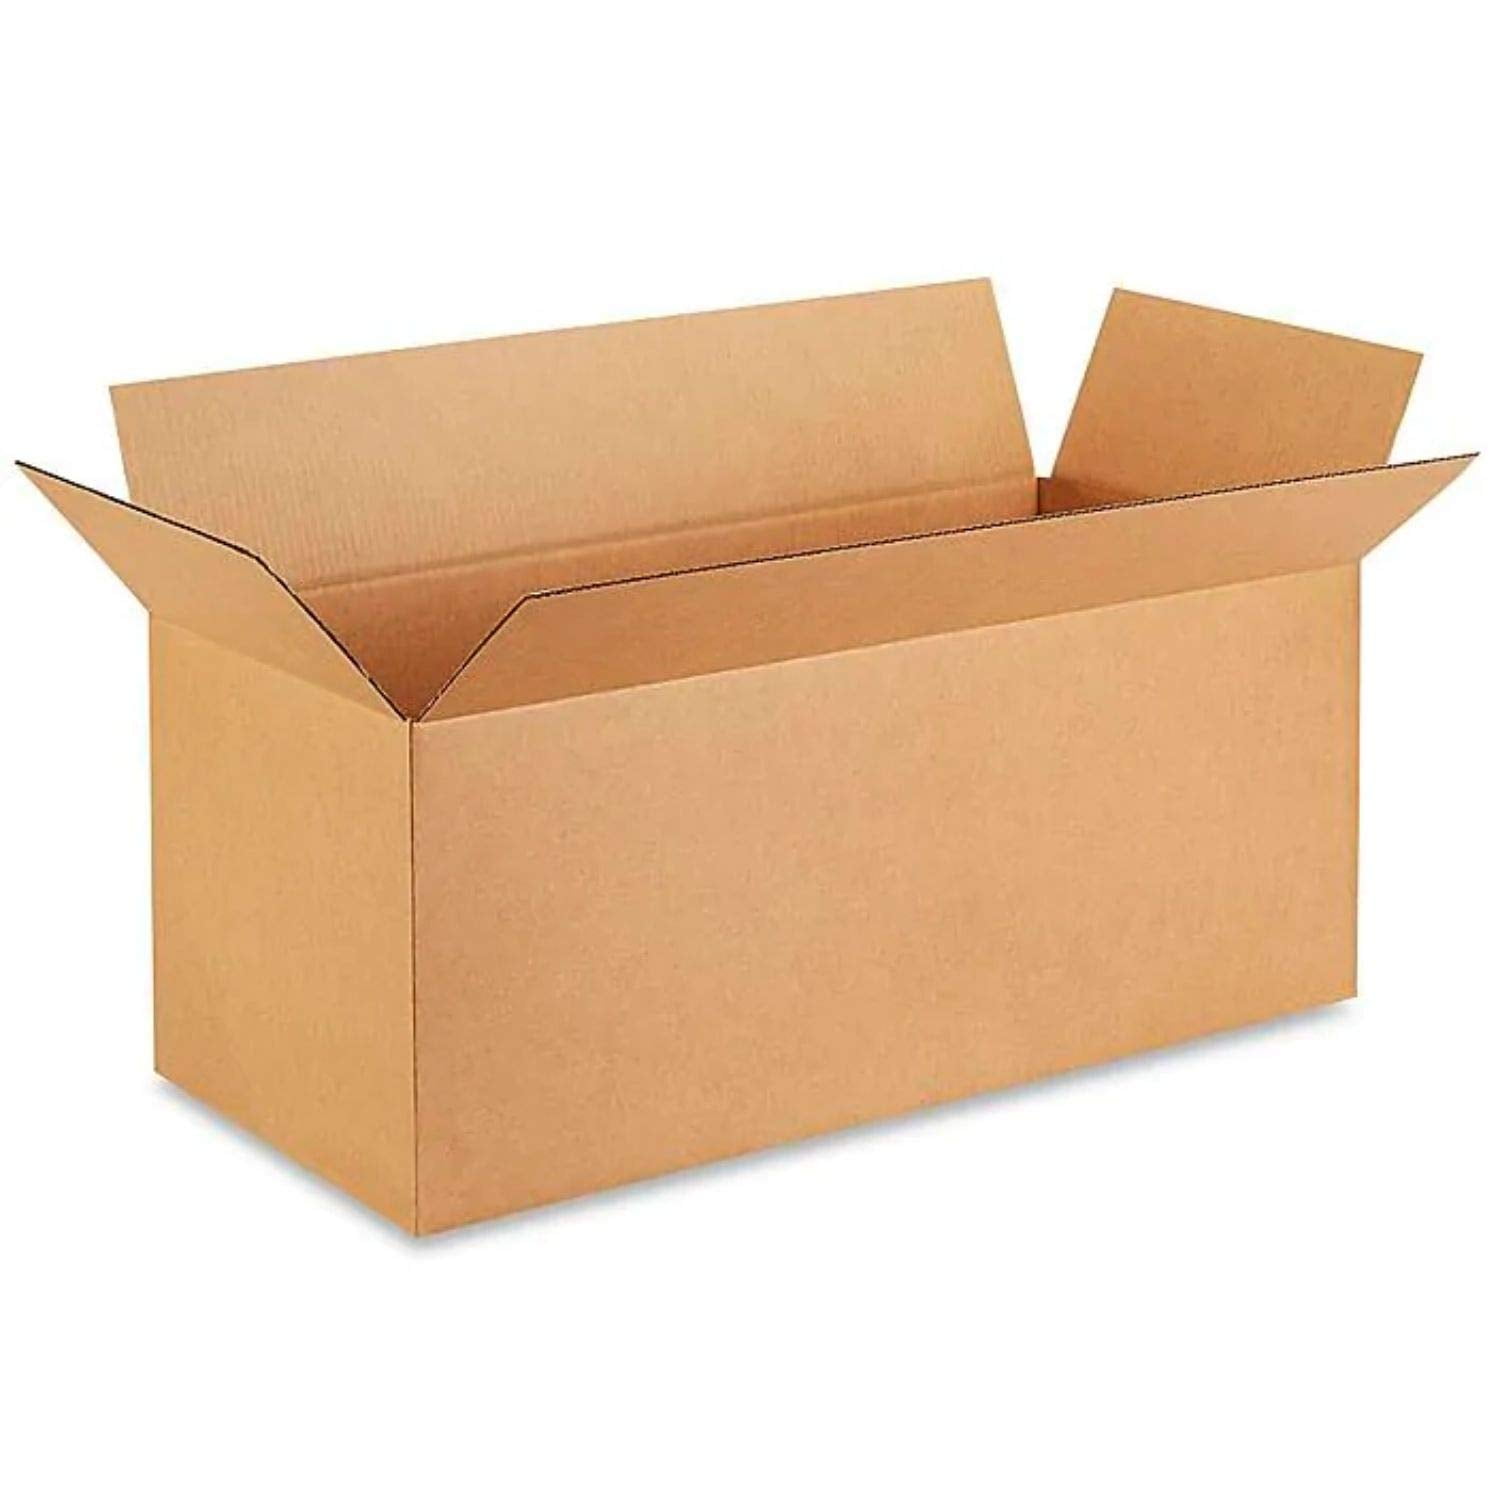 Strong packing boxes